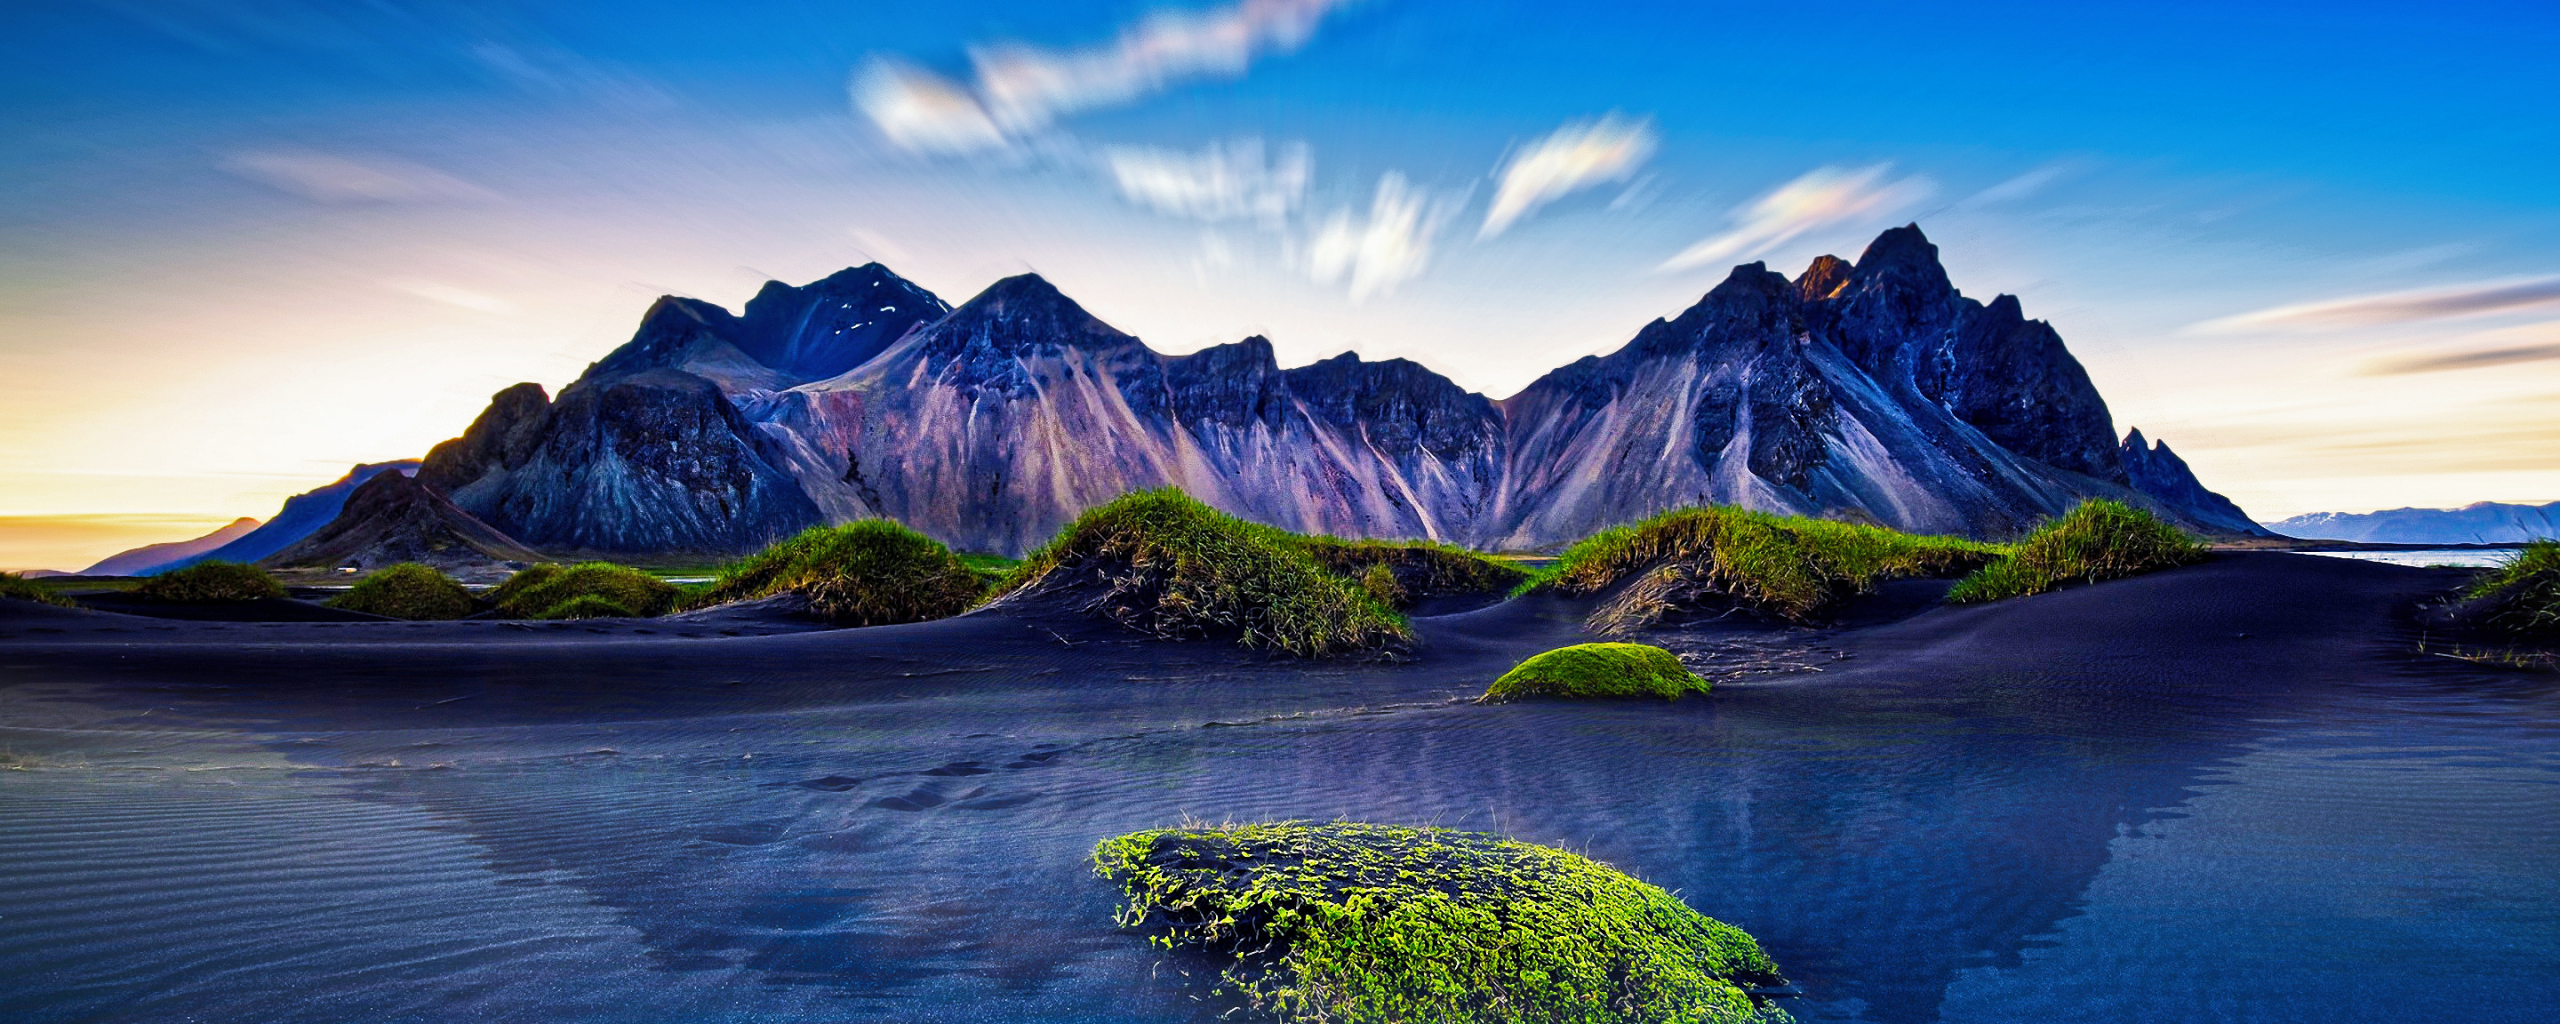 Download wallpaper 2560x1024 mountains, iceland, reflections, nature, dual  wide 21:9 2560x1024 hd background, 10620